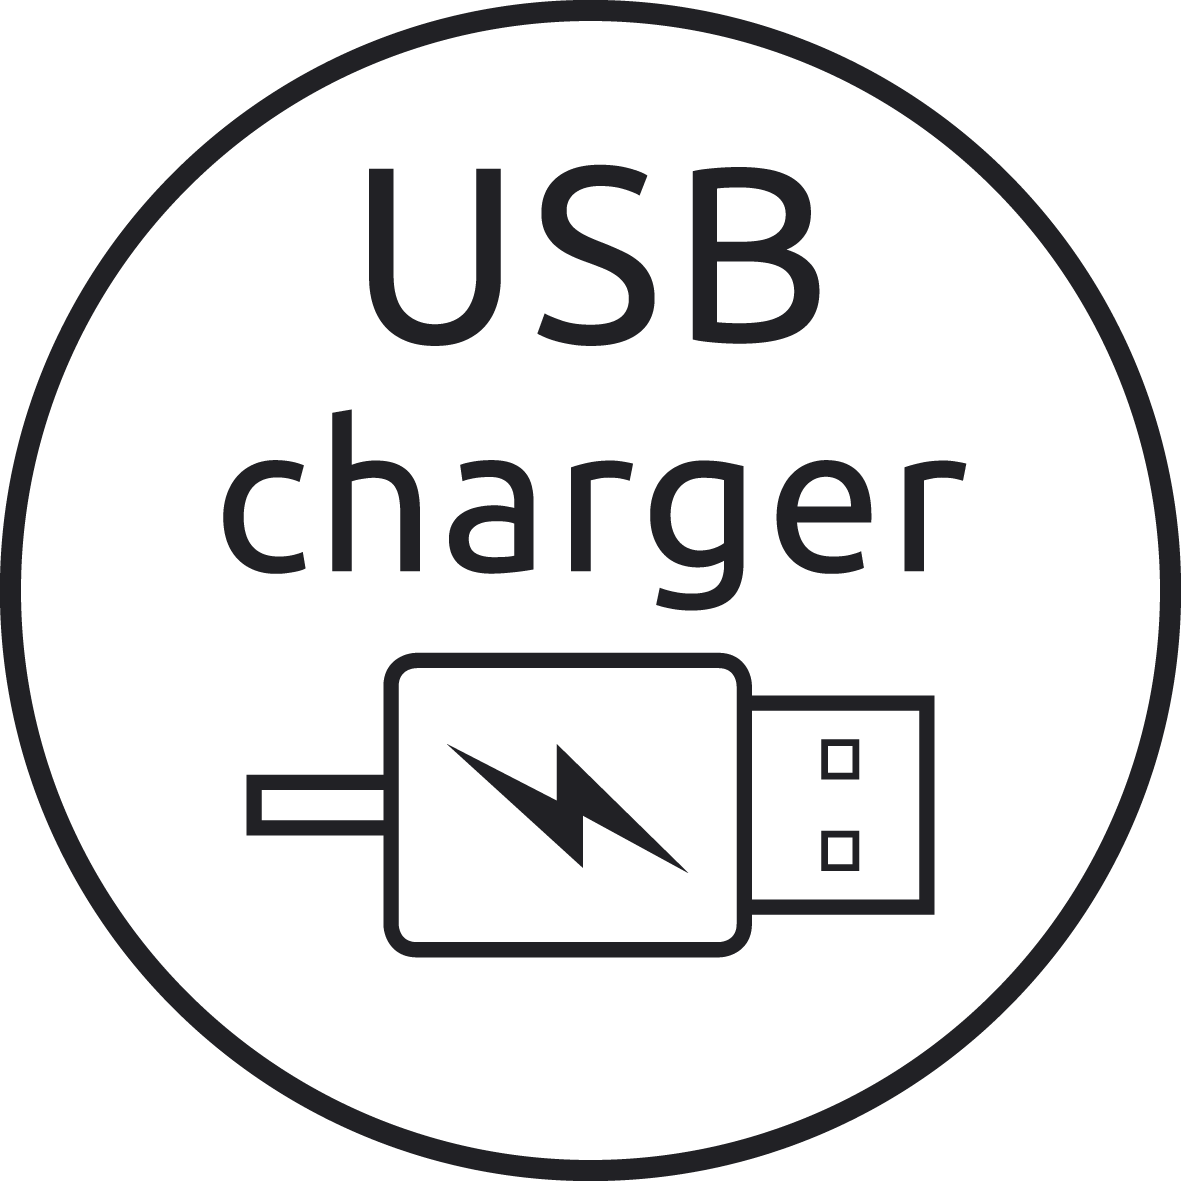 USBCHARGER